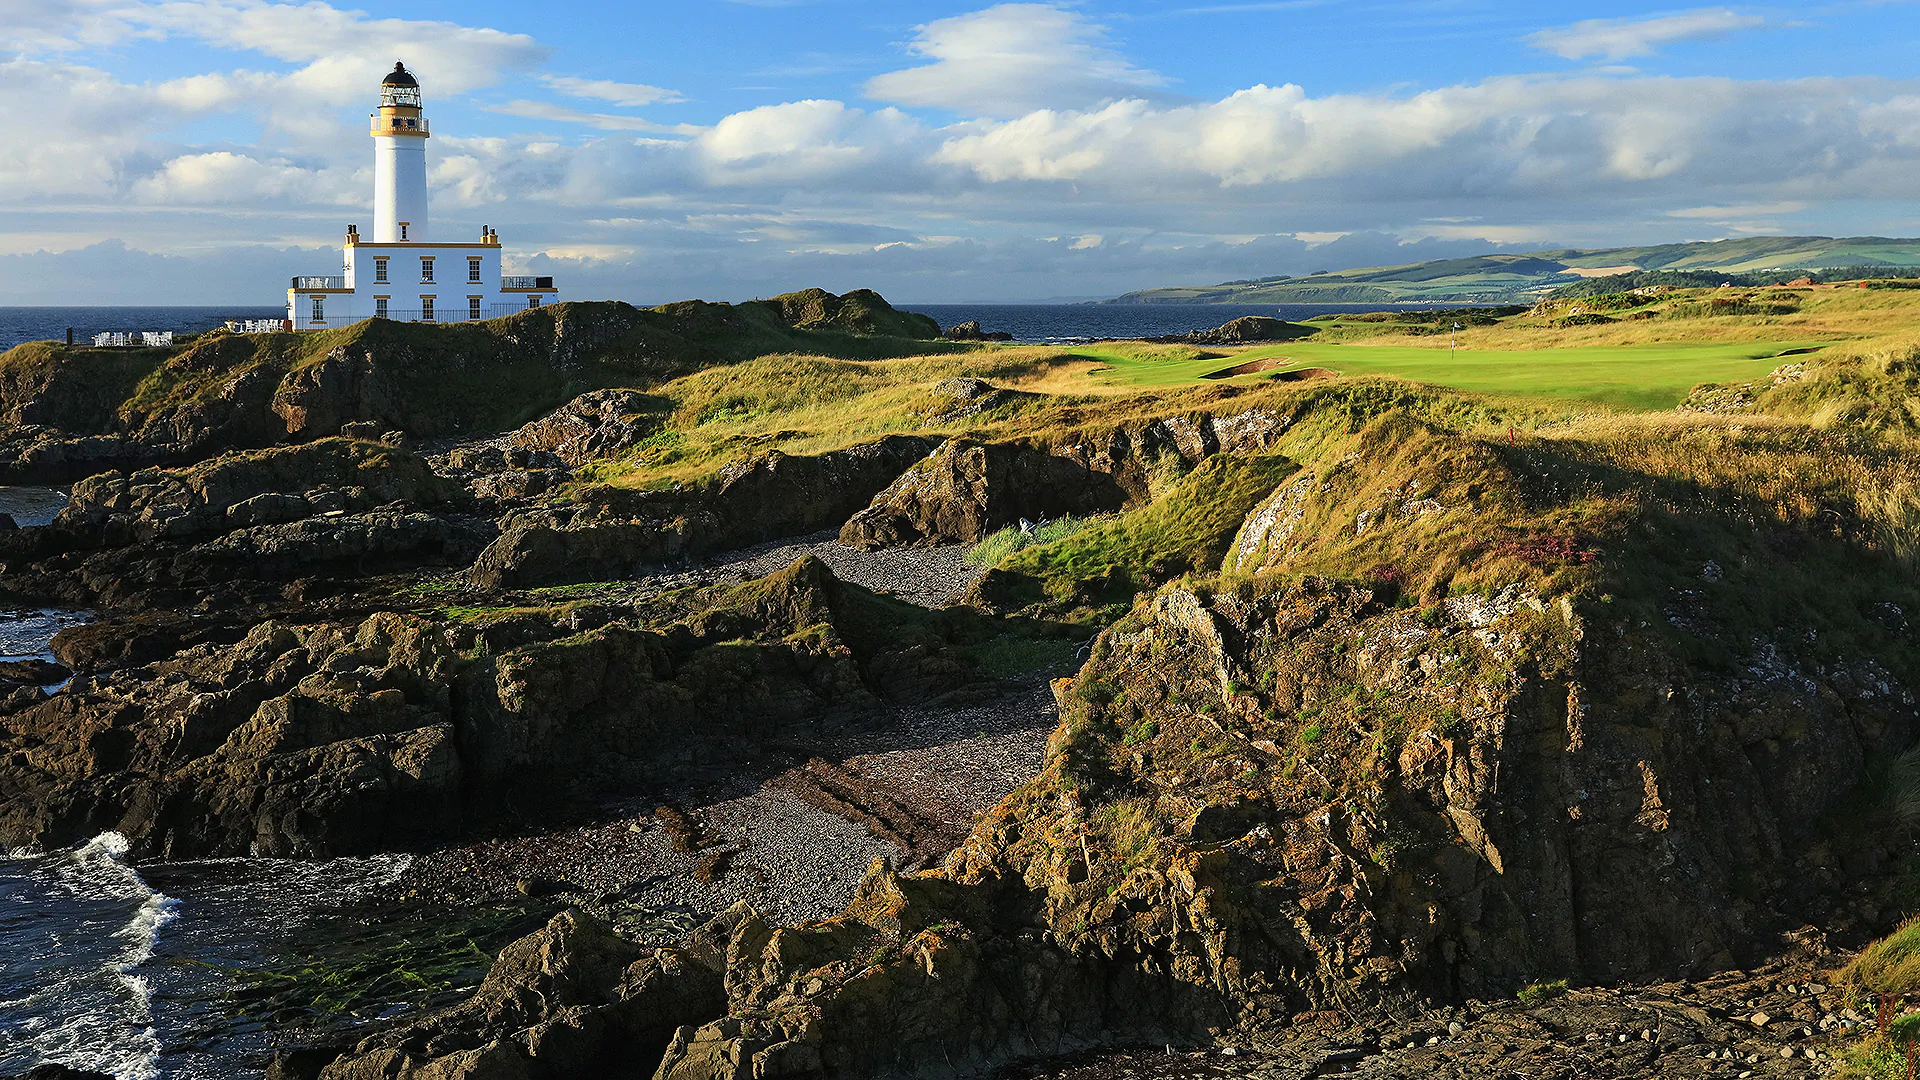 No indication when Trump Turnberry will next host an Open